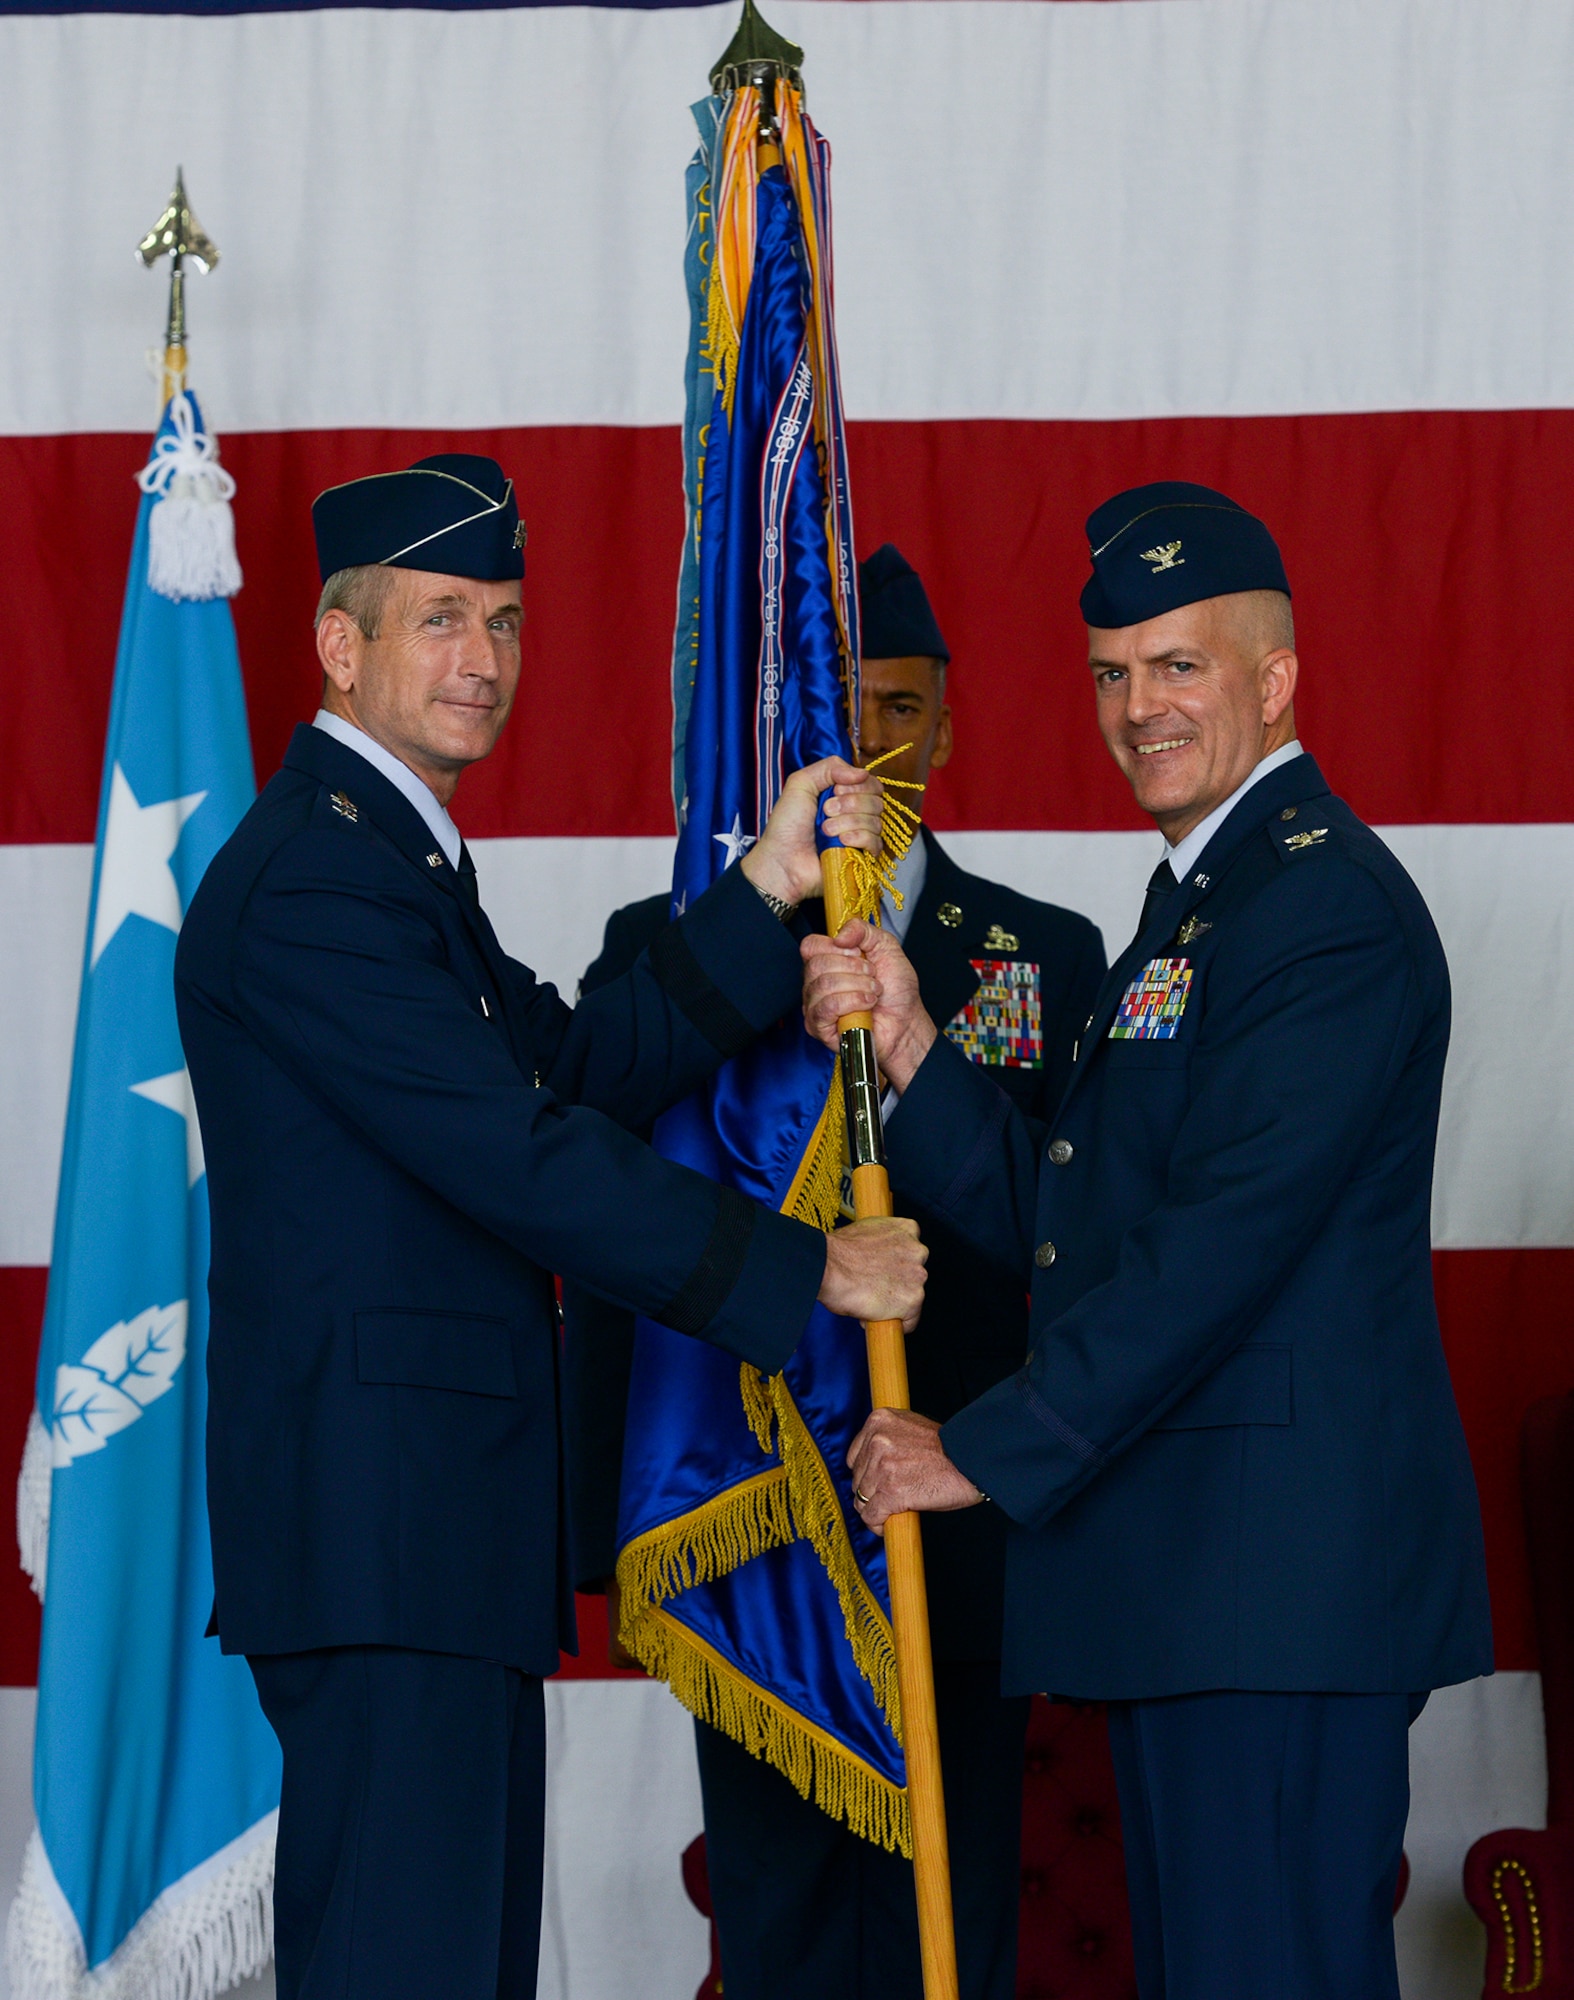 Col. Andrew Hansen, incoming 51st Fighter Wing commander, accepts the guideon and command of the wing from Lt. Gen. Terrence O'Shaughnessy, 7th Air Force commander, during the 51st FW change of command ceremony June 16, 2015, at Osan Air Base, Republic of Korea. Hansen is the 63rd commander in the wing's history. (U.S. Air Force photo by Staff Sgt. Jake Barreiro/Released)